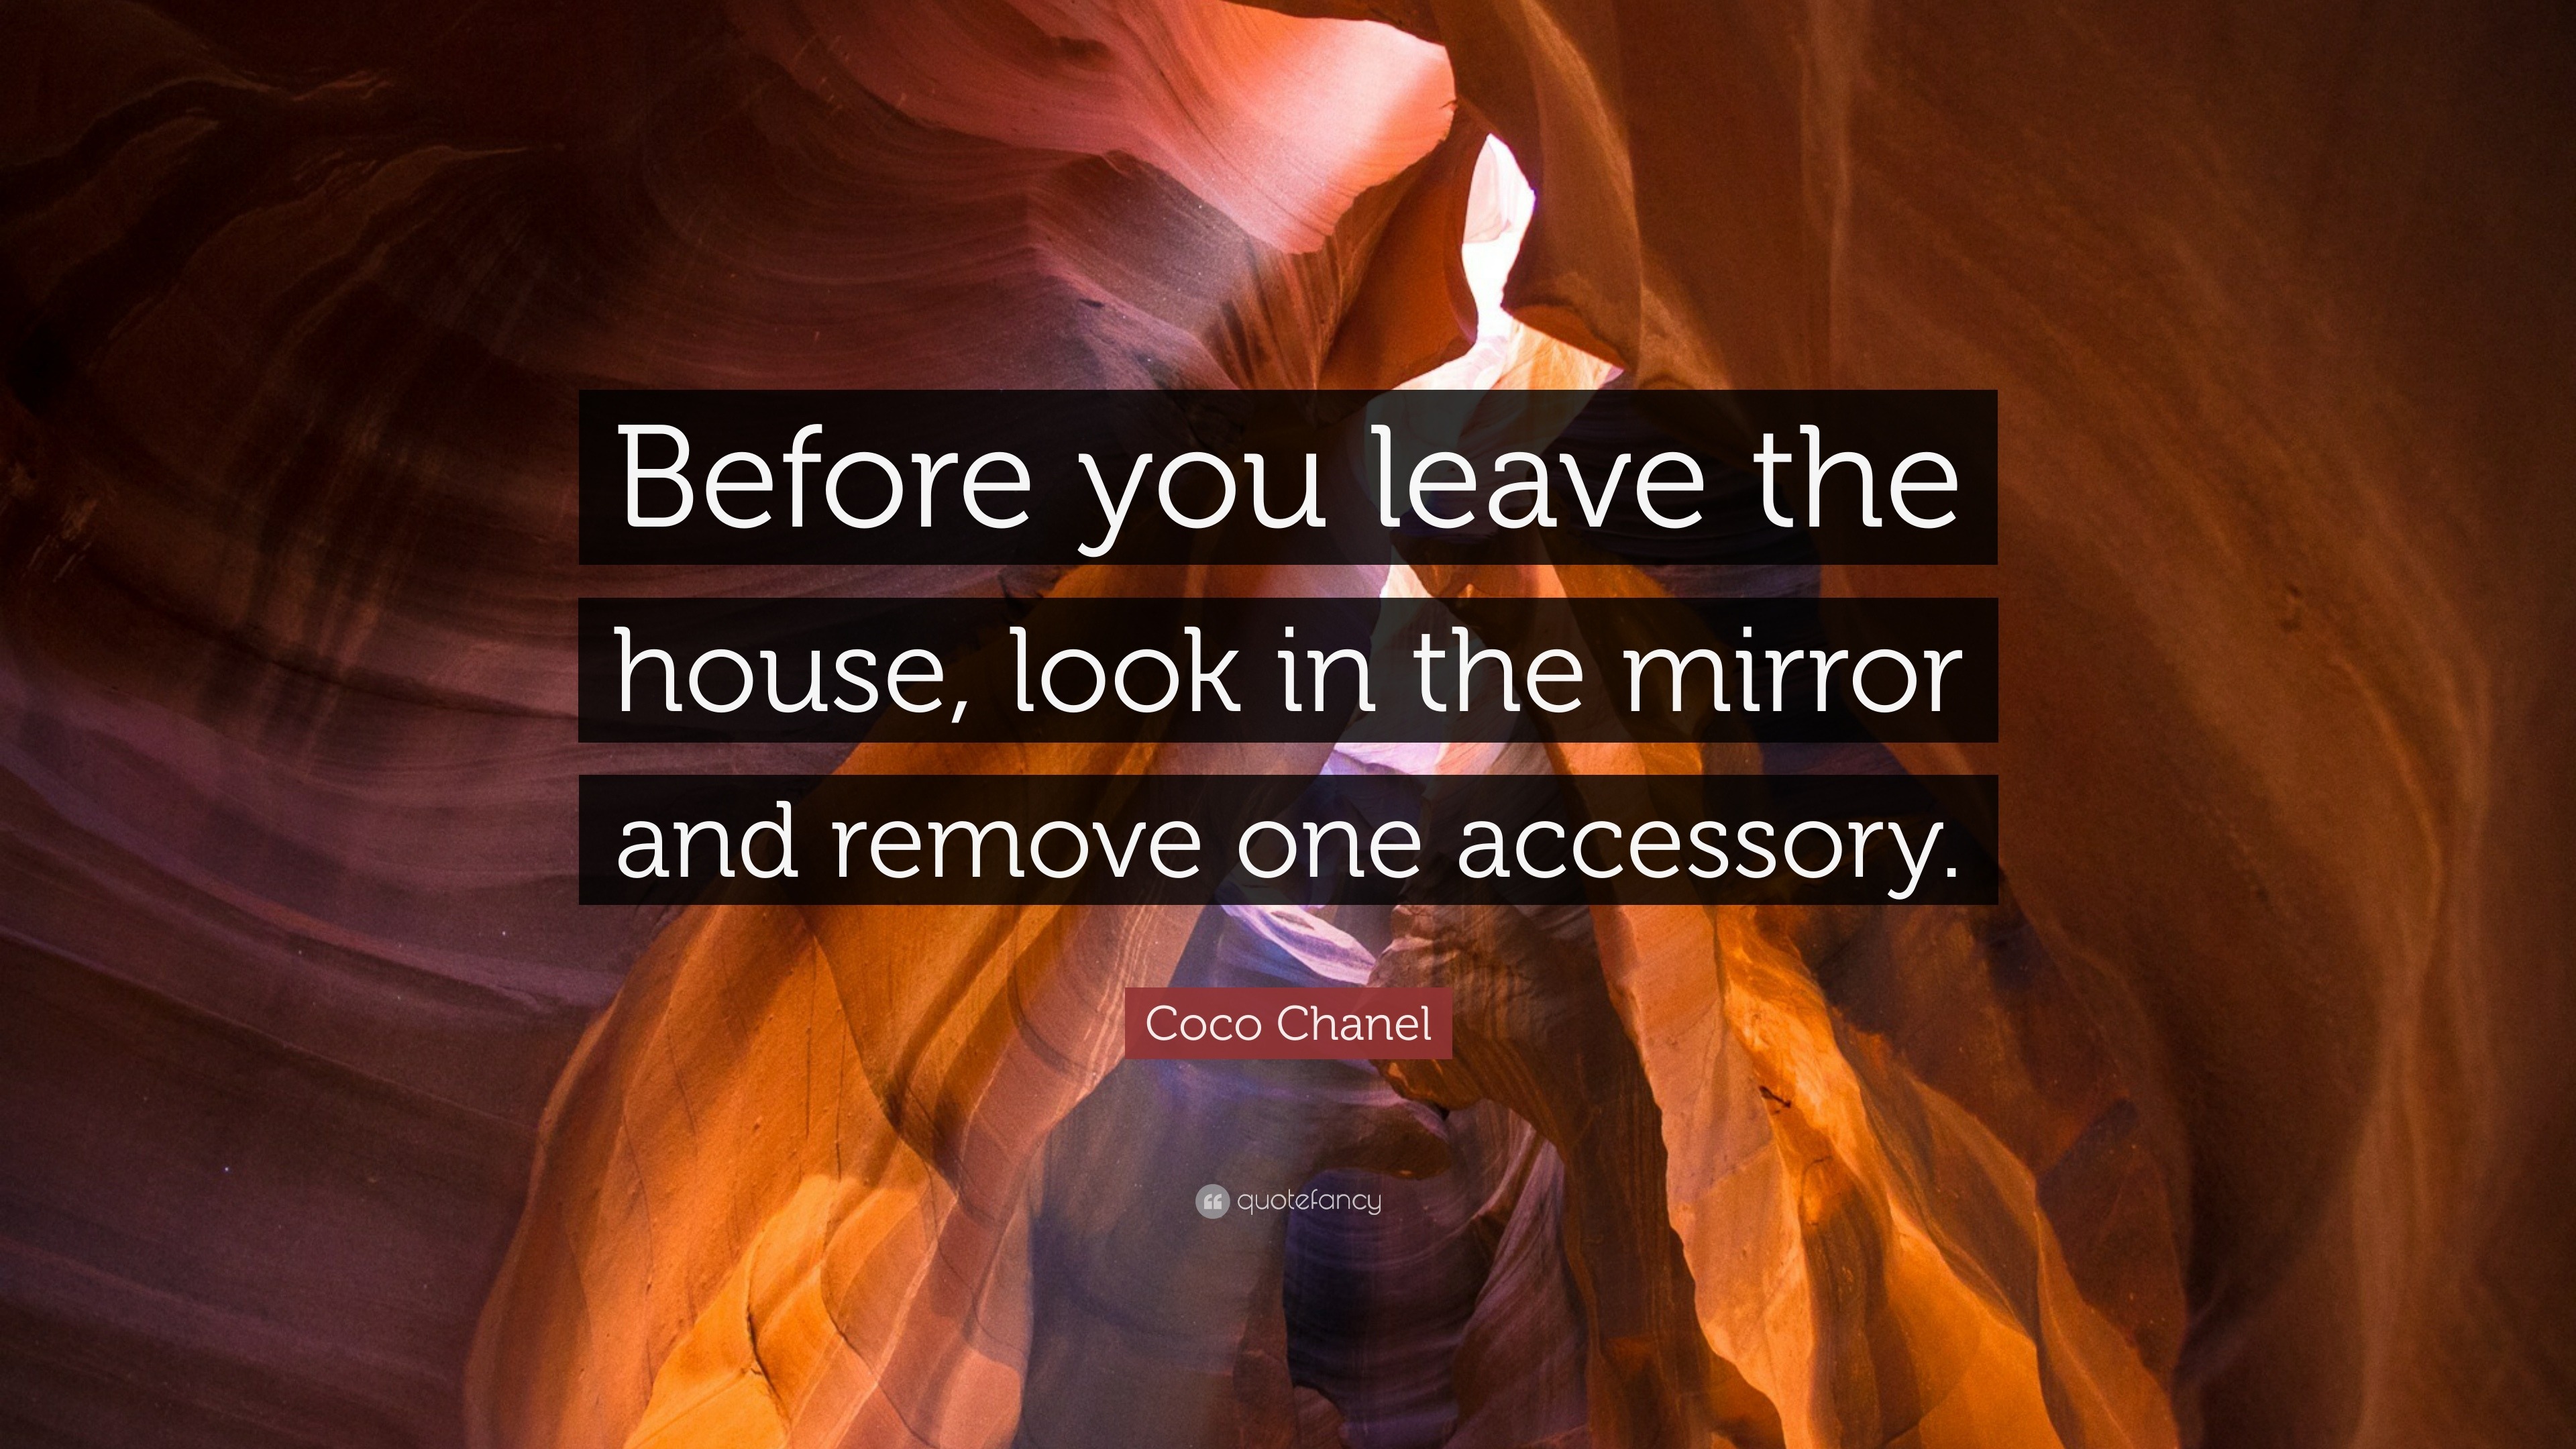 Coco Chanel Quote: “Before you leave the house, look in the mirror